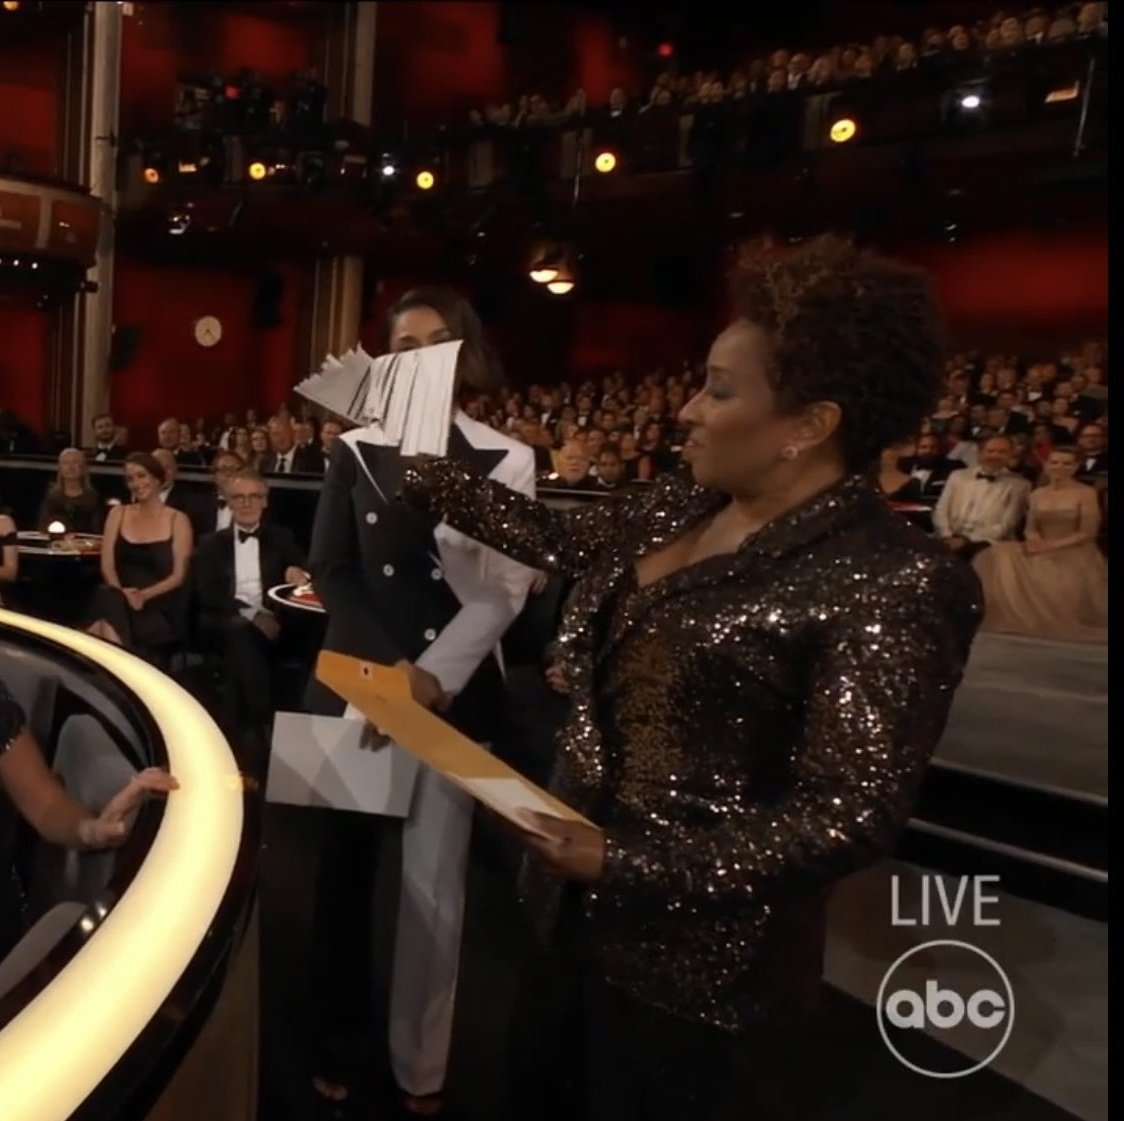 During the #Oscars @iamwandasykes pulls out a pre-shredded Texas Voting Registration Form. 

Texas voting suppression laws are a joke. Thank you #WandaSykes for shining a light on this. #AcademyAwards2022 

#TurnTexasBlue
#ActOut
#LivingBlue2022
#wtpBlue